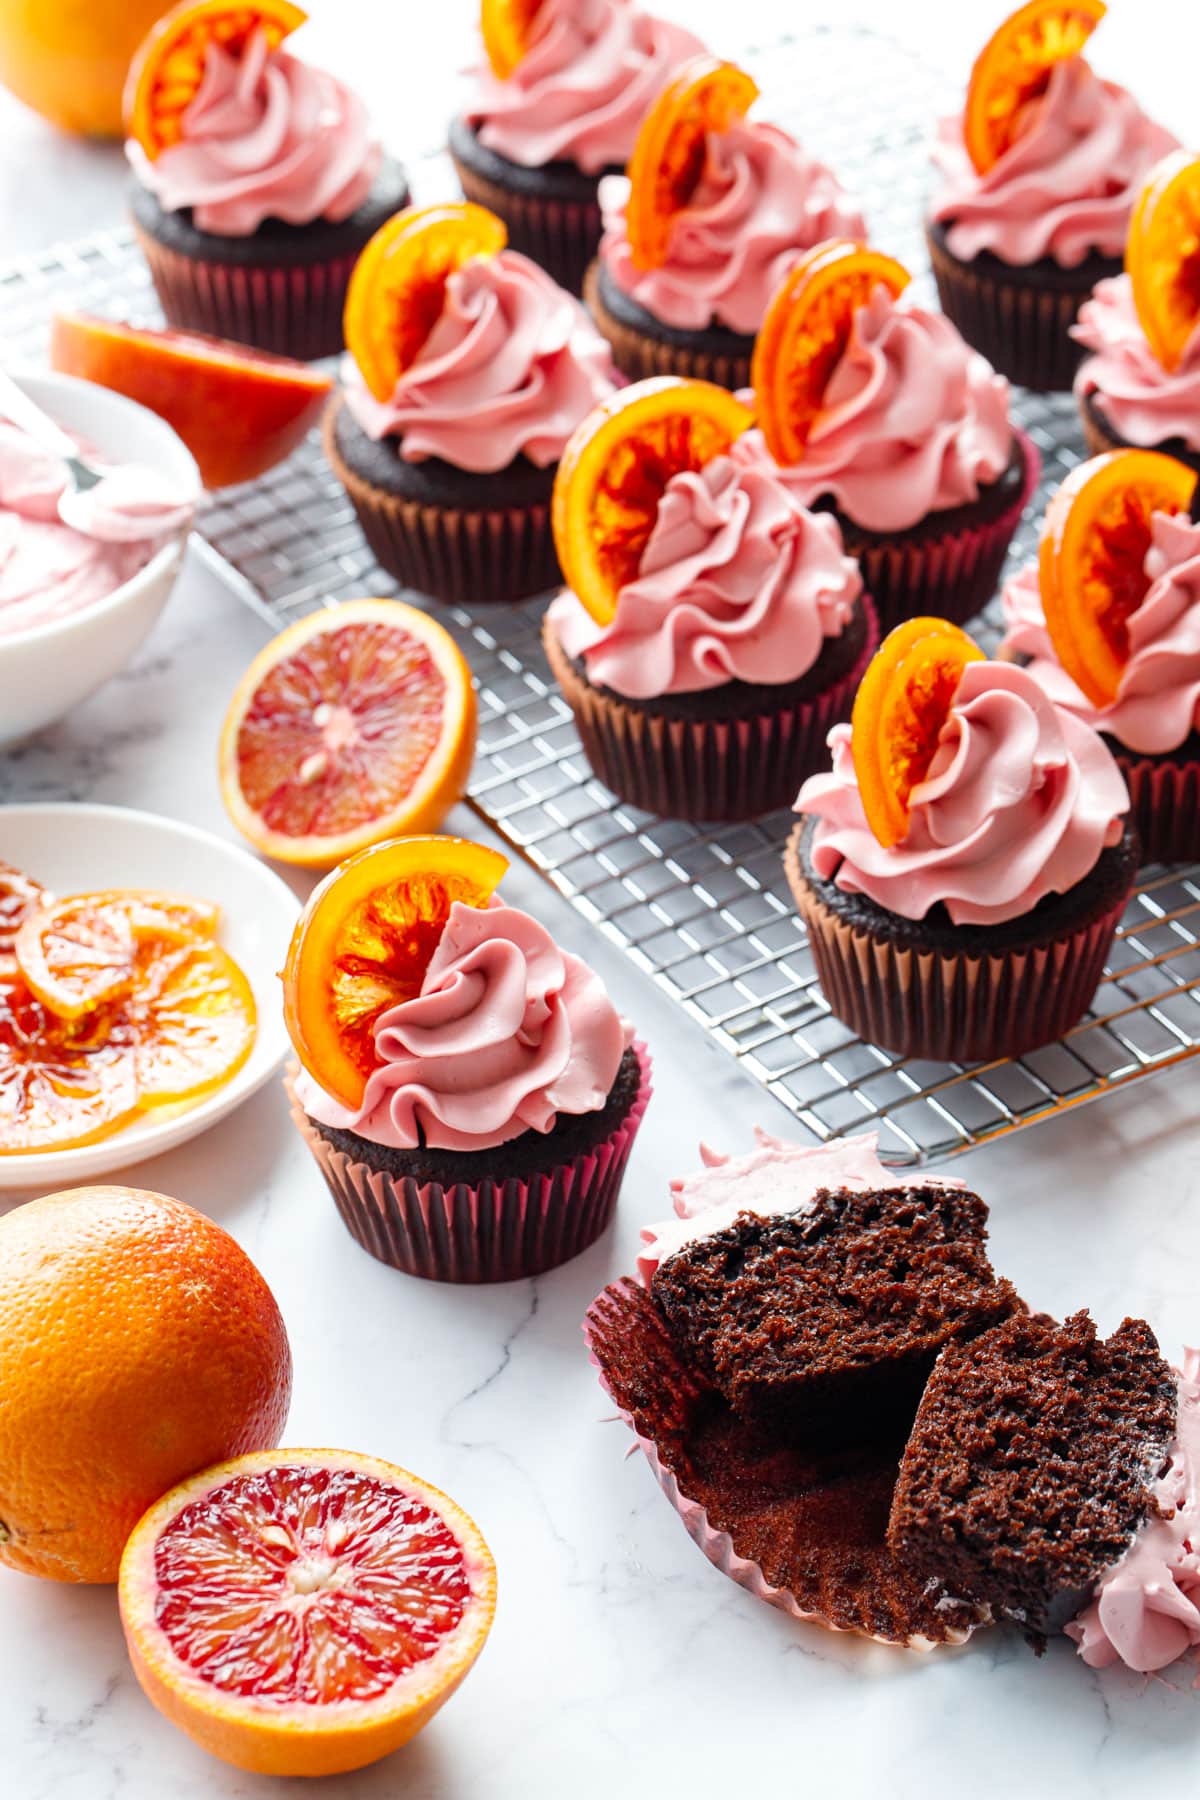 Scattered Chocolate Olive Oil & Blood Orange Cupcakes on a marble background, one cupcake cut in half to show the interior texture, with oranges (fresh and candied), and a bowl of frosting in the background.